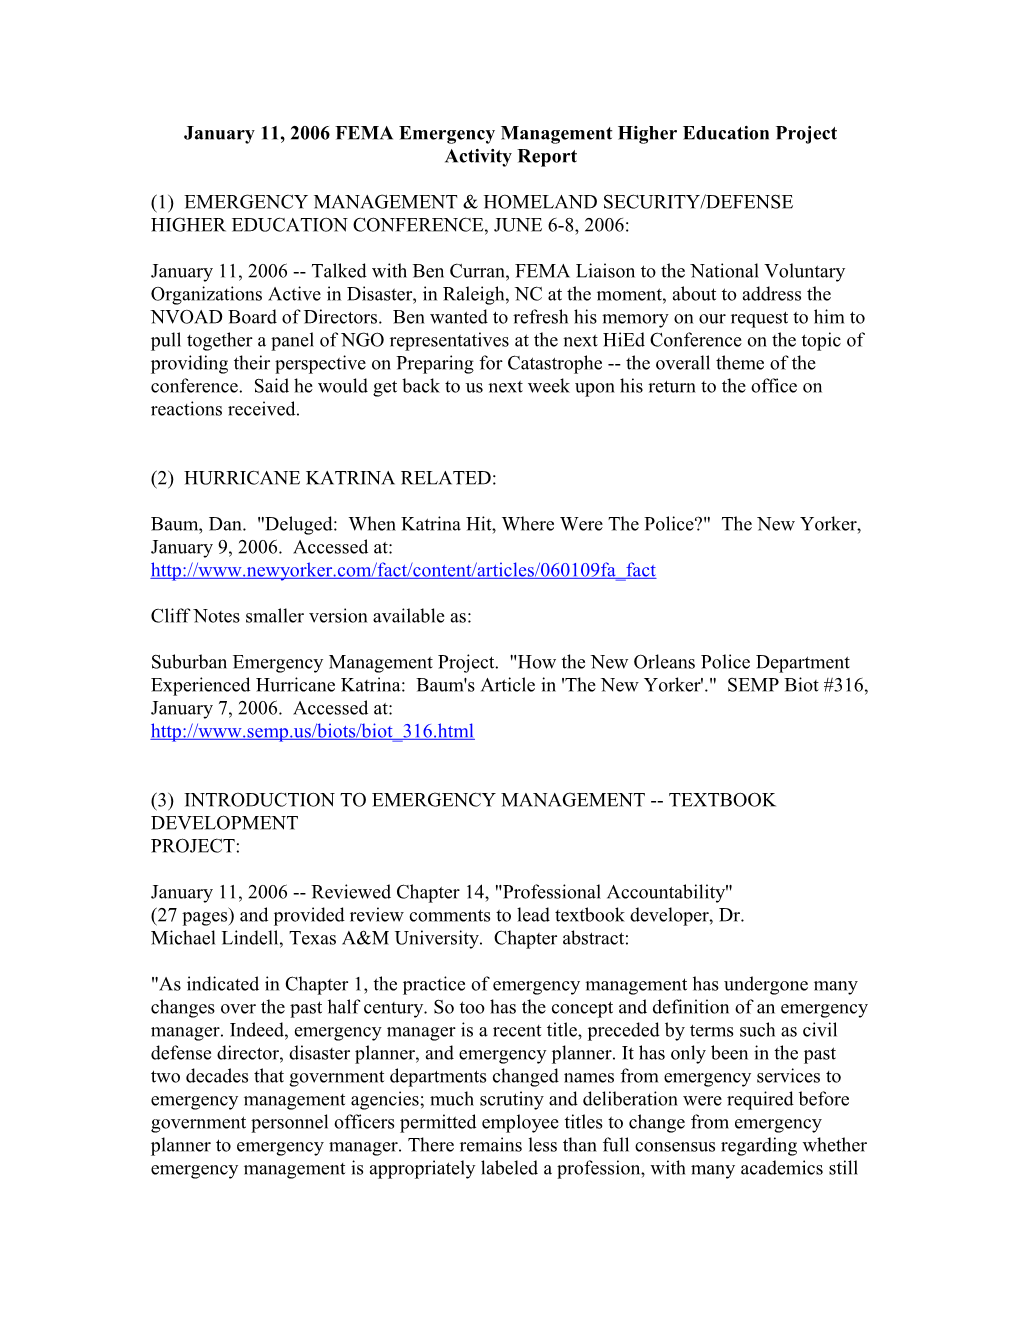 January 11, 2006 FEMA Emergency Management Higher Education Project Activity Report